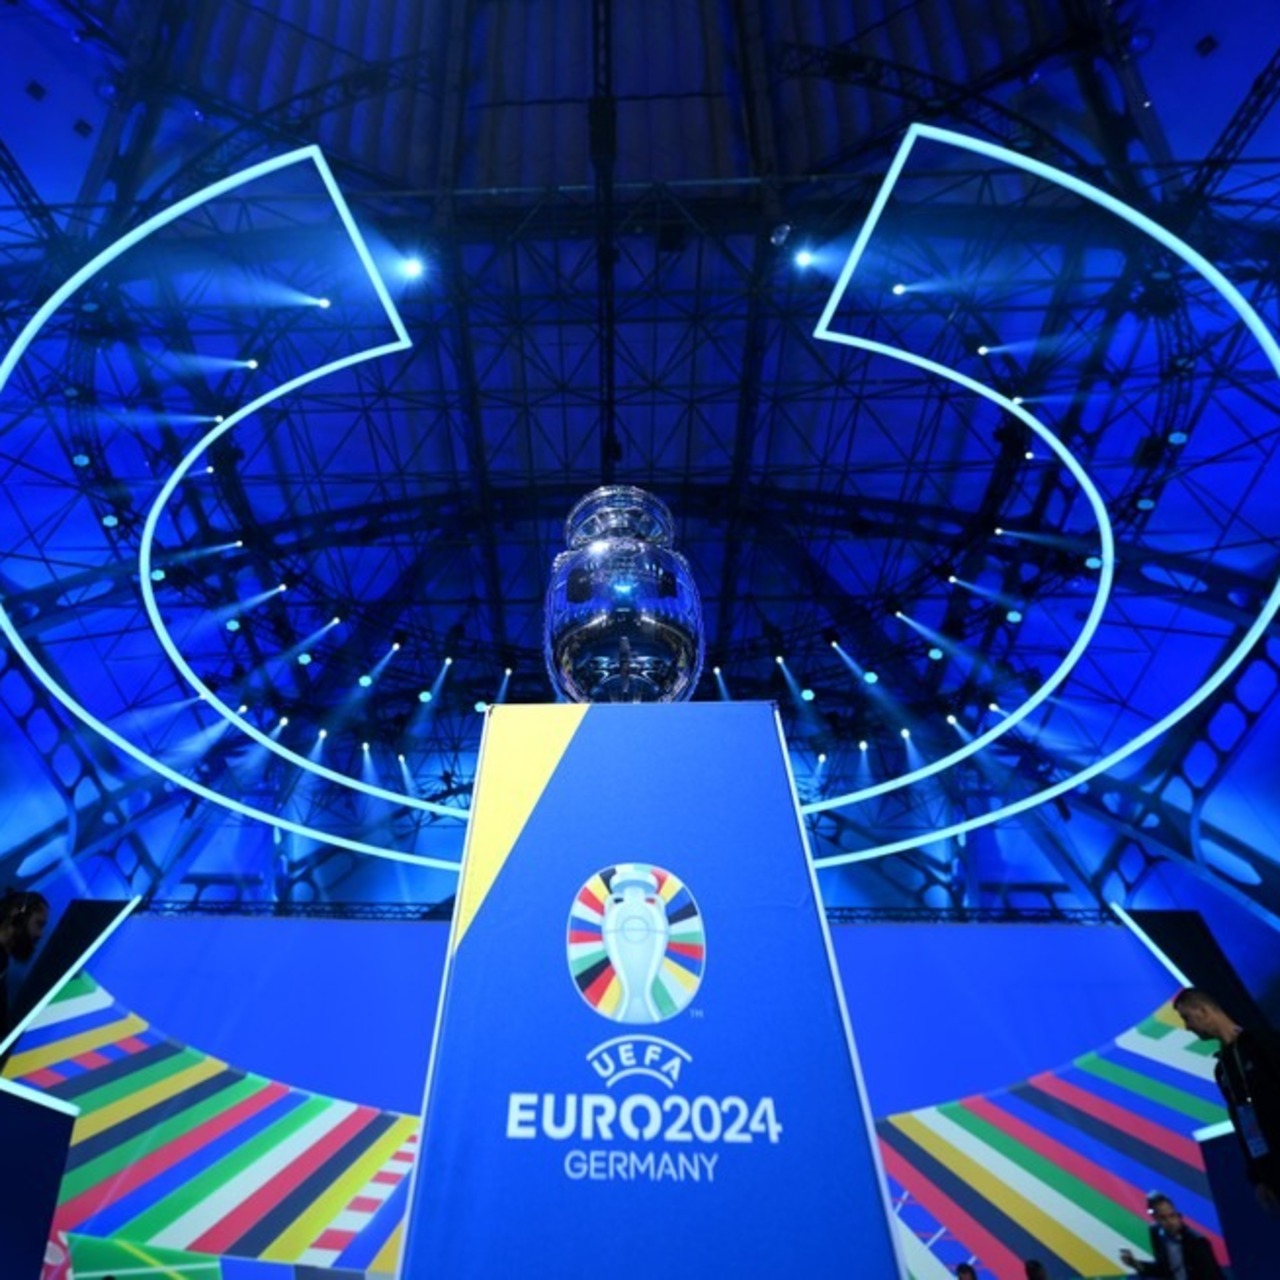 Prize money for EURO 2024 has been determined!